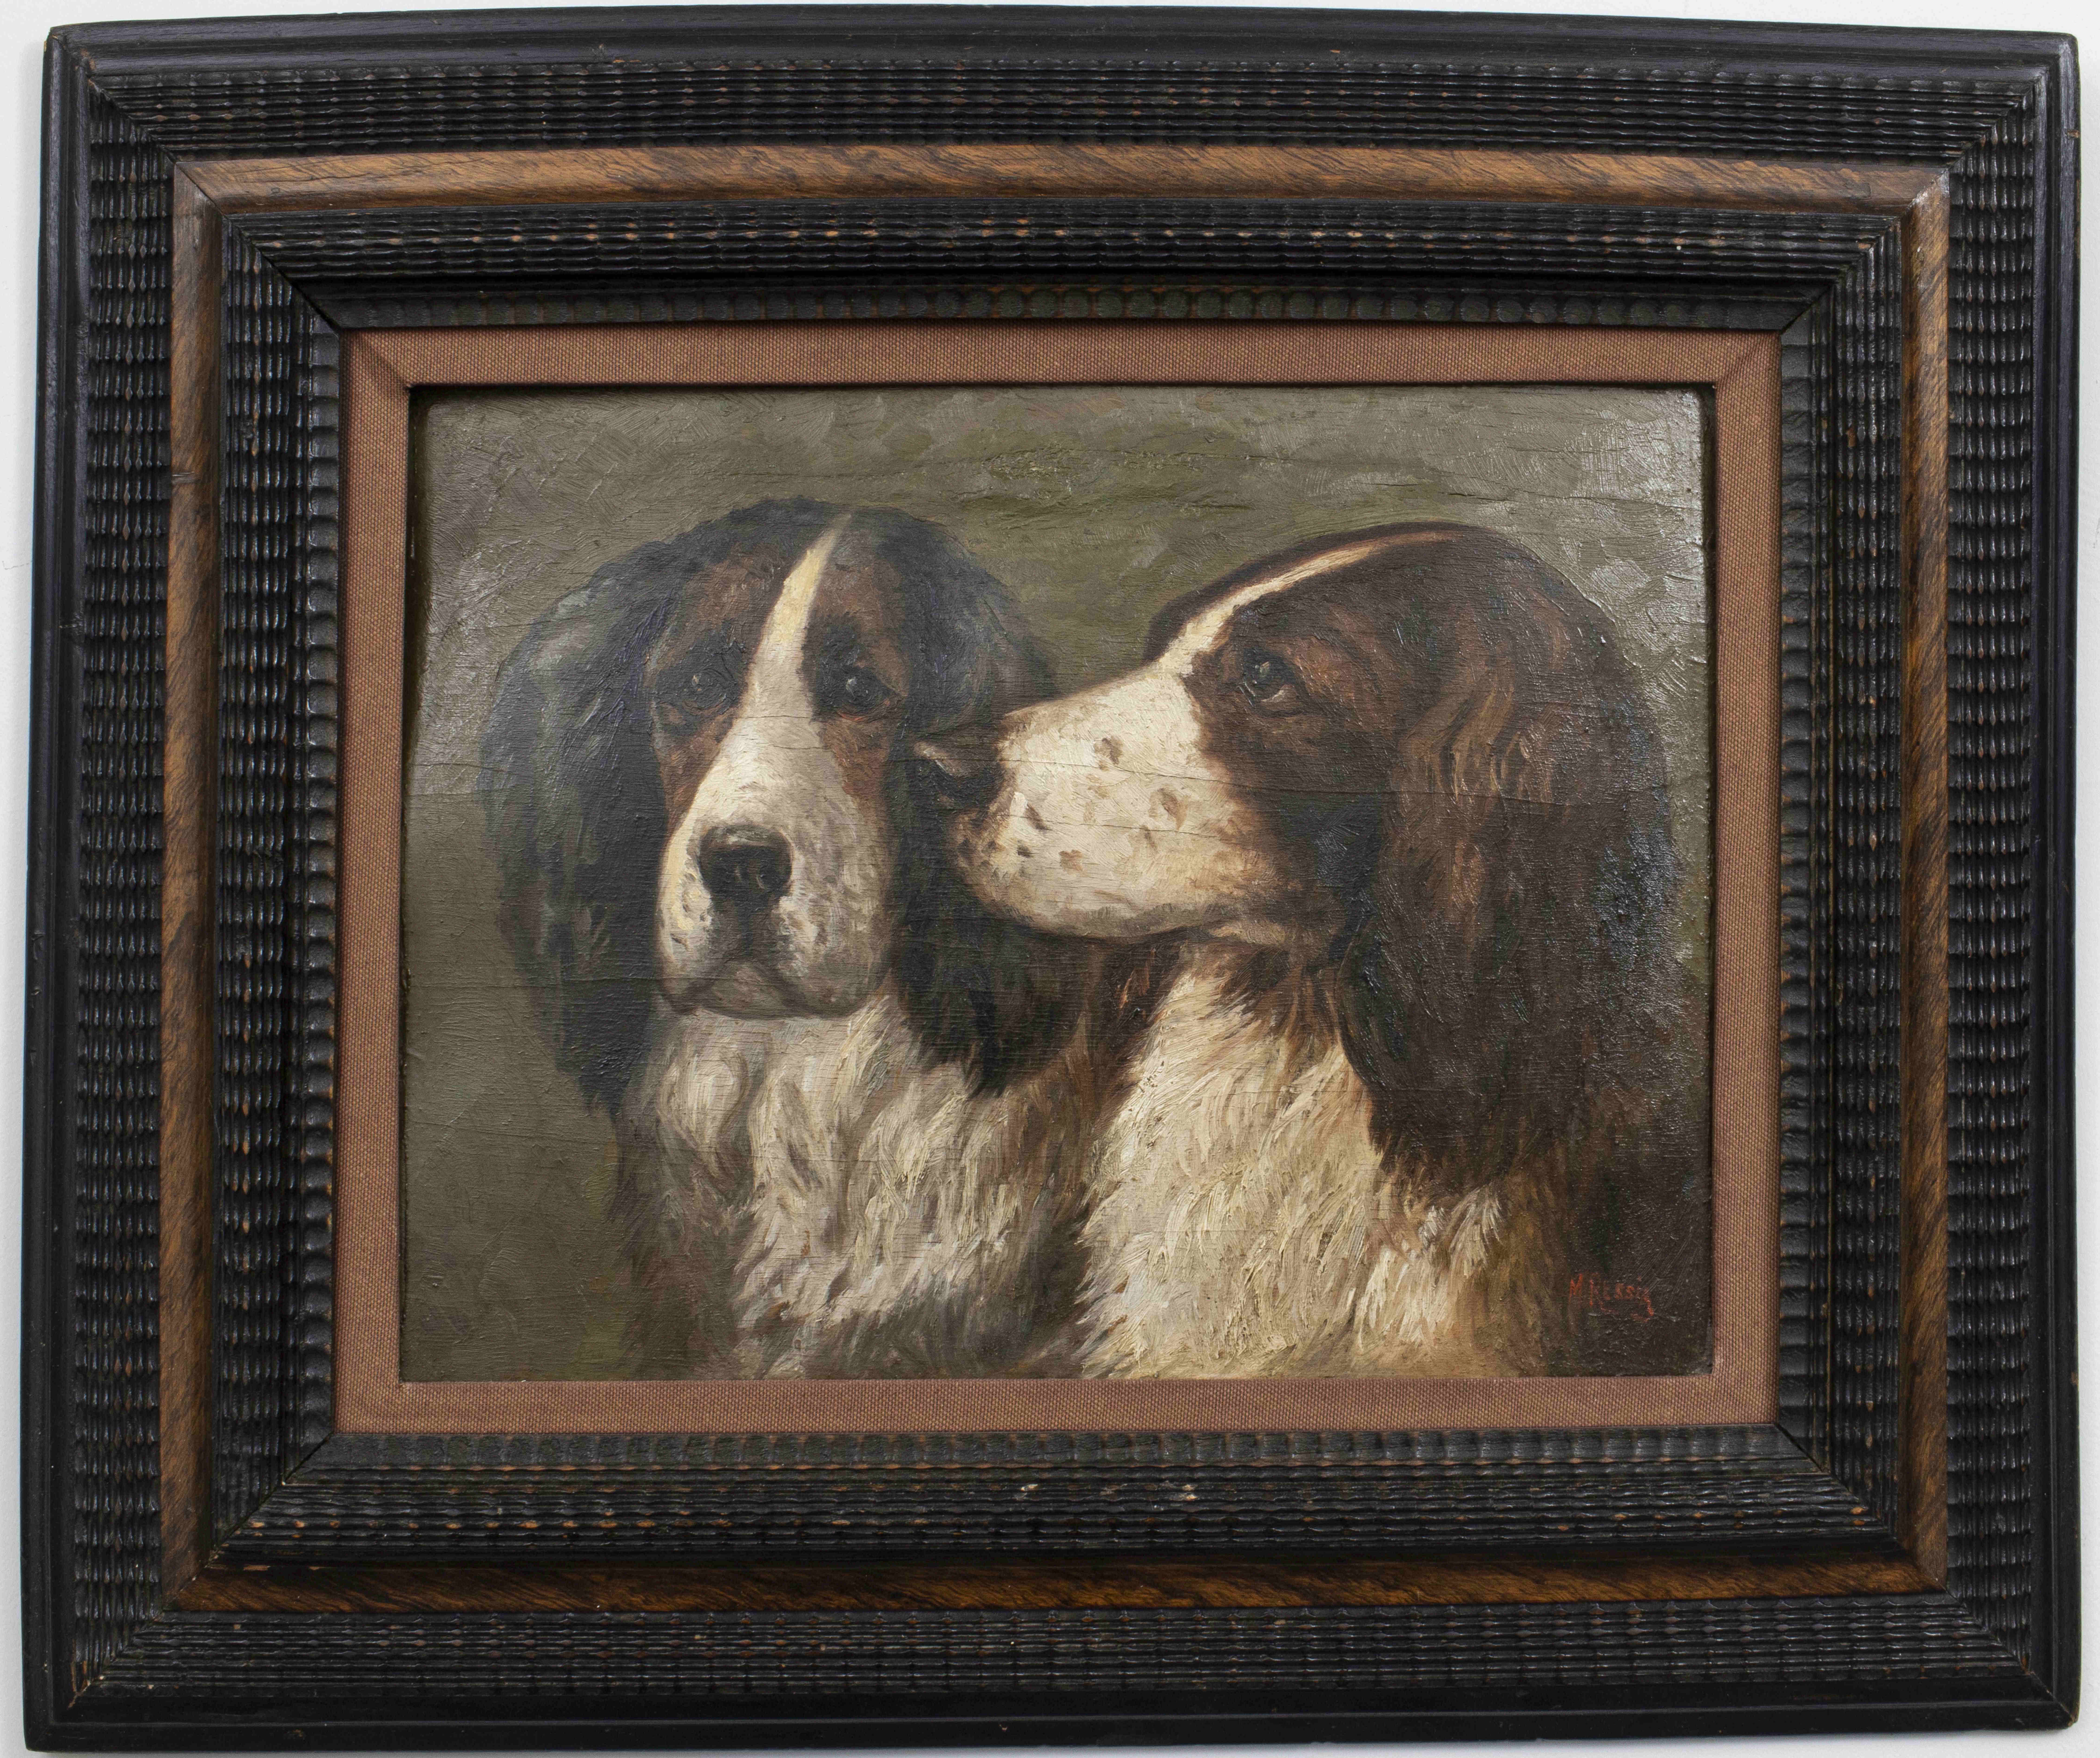 M. RESSIR "PORTRAIT OF TWO DOGS"